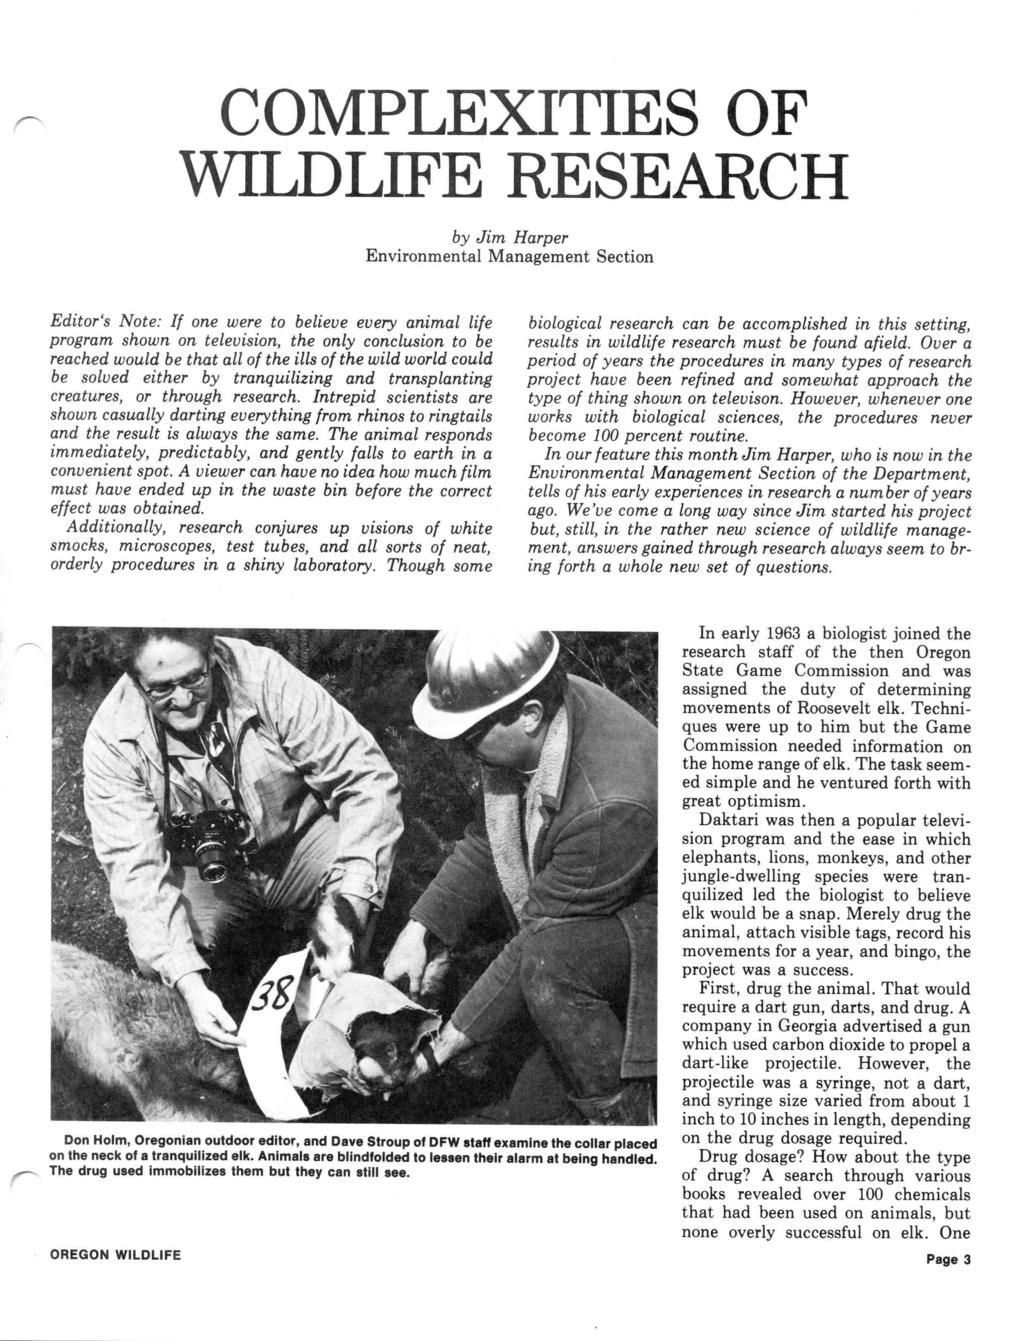 COMPLEXITIES OF WILDLIFE RESEARCH by Jim Hape Envionmental Management Section Edito's Note: If one wee to believe evey animal life pogam shown on television, the only conclusion to be eached would be